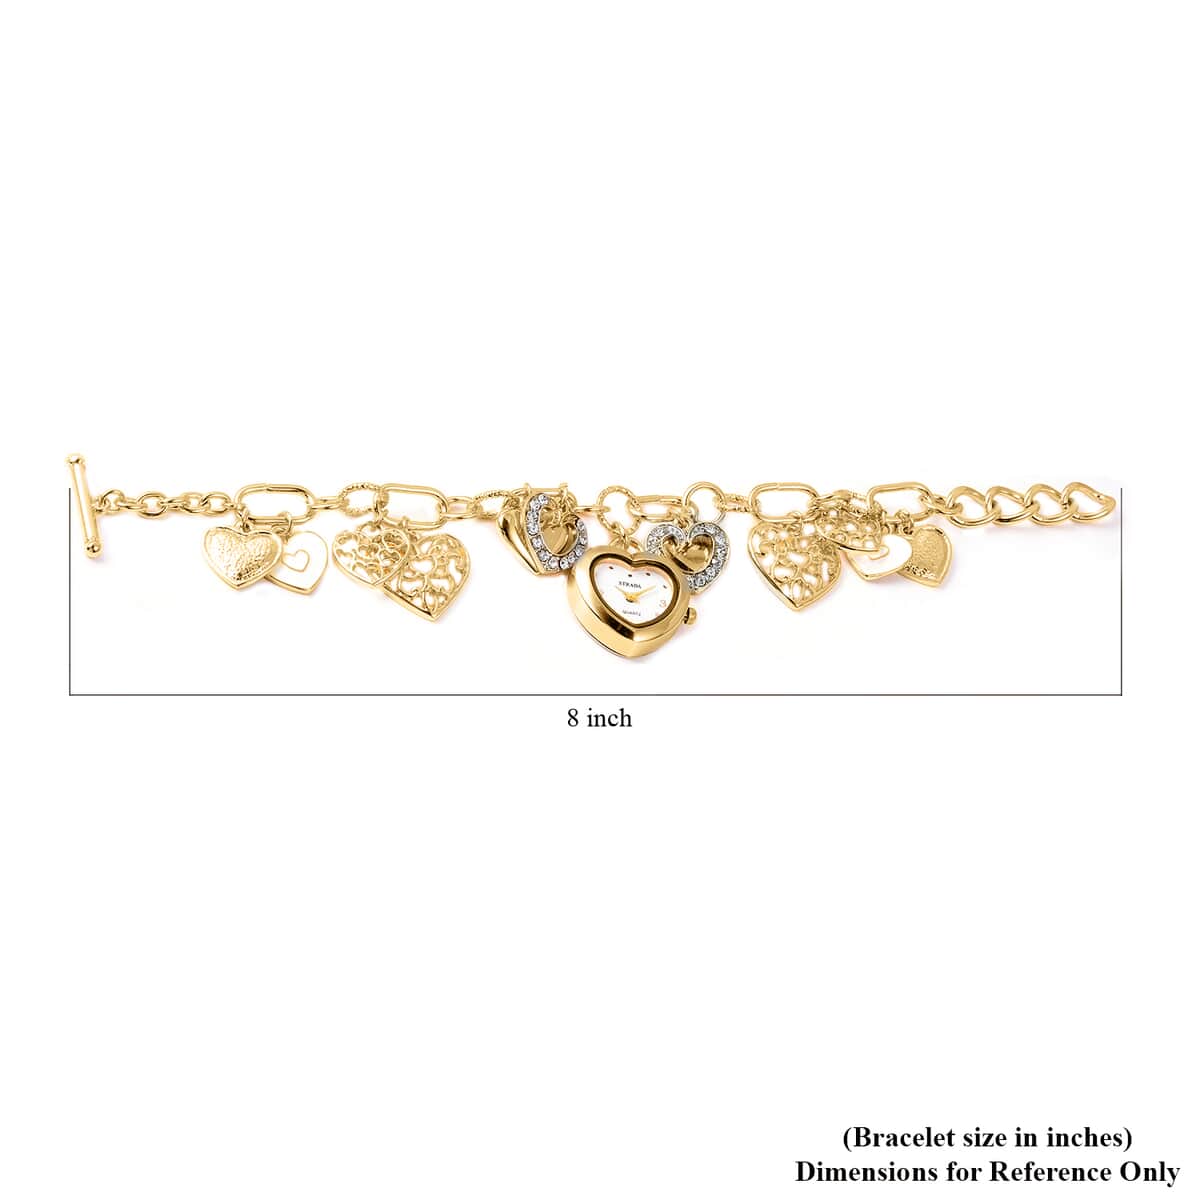 Strada White Austrian Crystal, Enameled Japanese Movement Charm Heart Bracelet Watch in Goldtone (7.5-9 in) image number 4